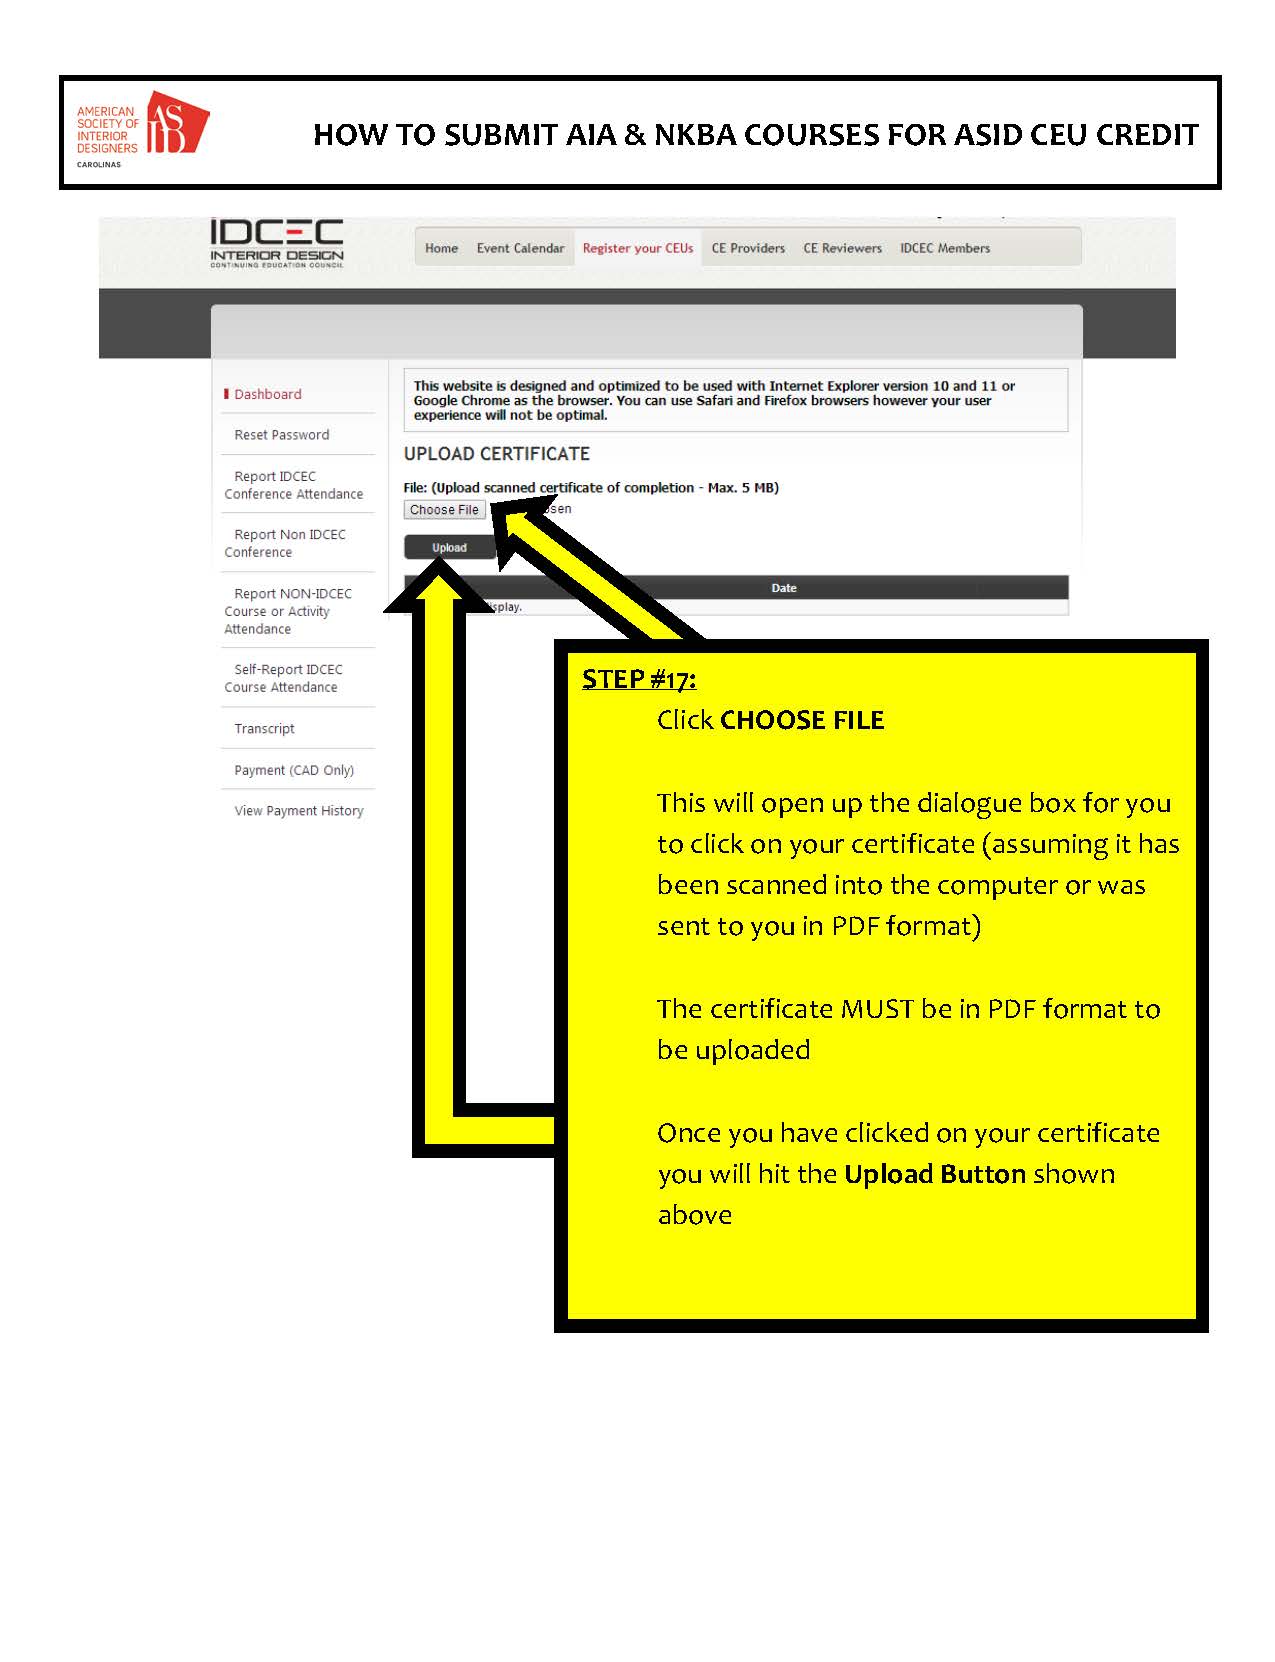 HOW TO SUBMIT AIA  NKBA COURSES FOR ASID CEU CREDIT Page 09